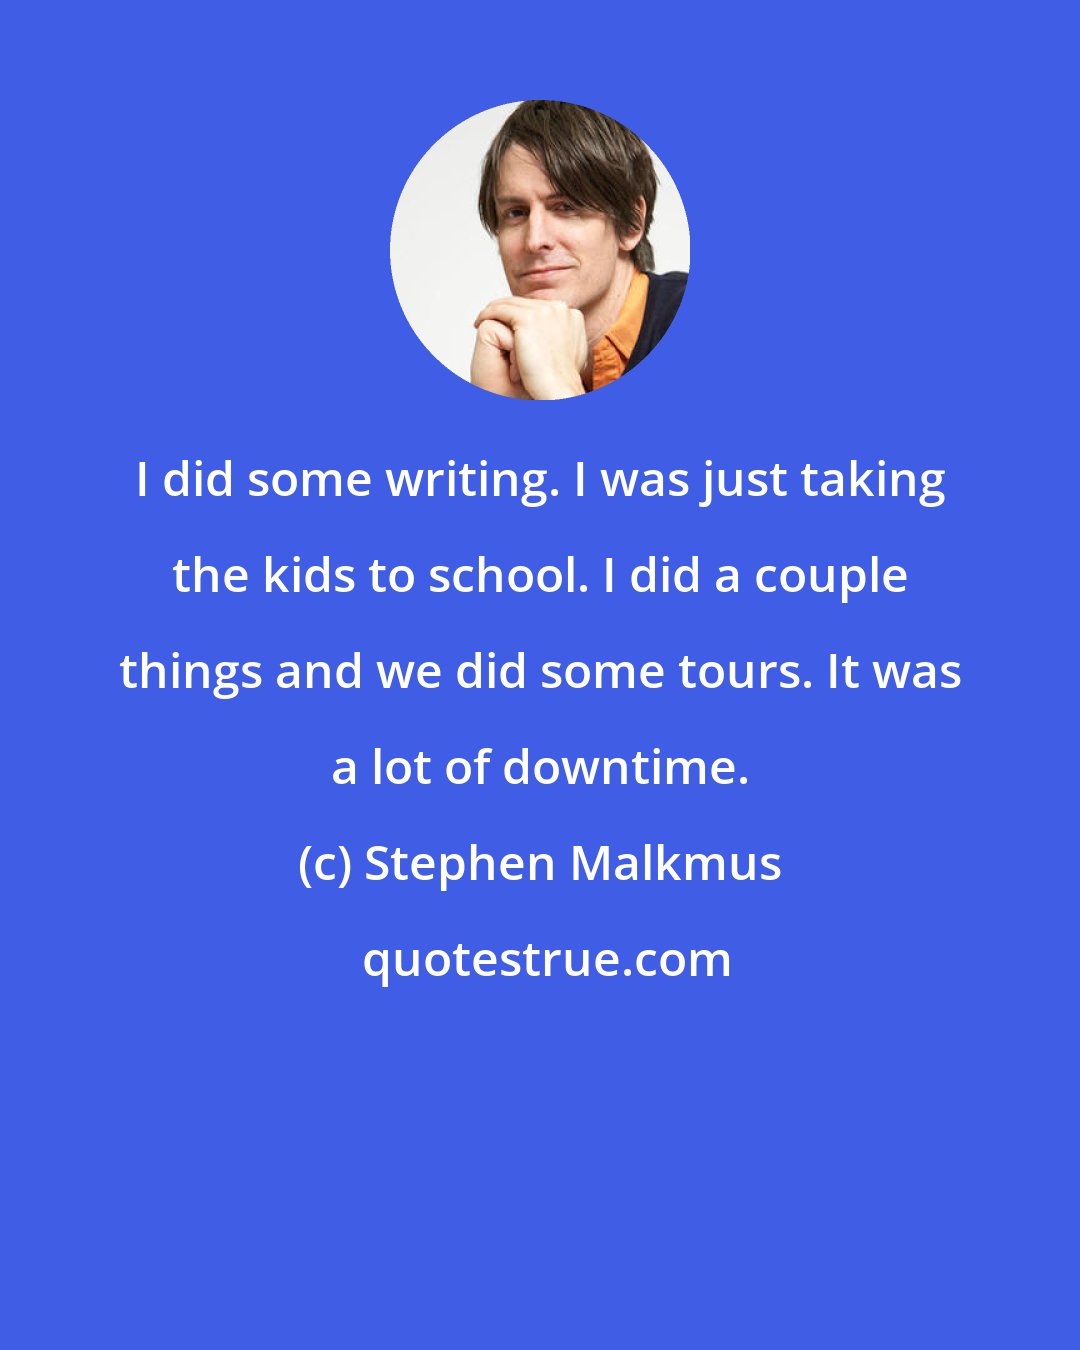 Stephen Malkmus: I did some writing. I was just taking the kids to school. I did a couple things and we did some tours. It was a lot of downtime.